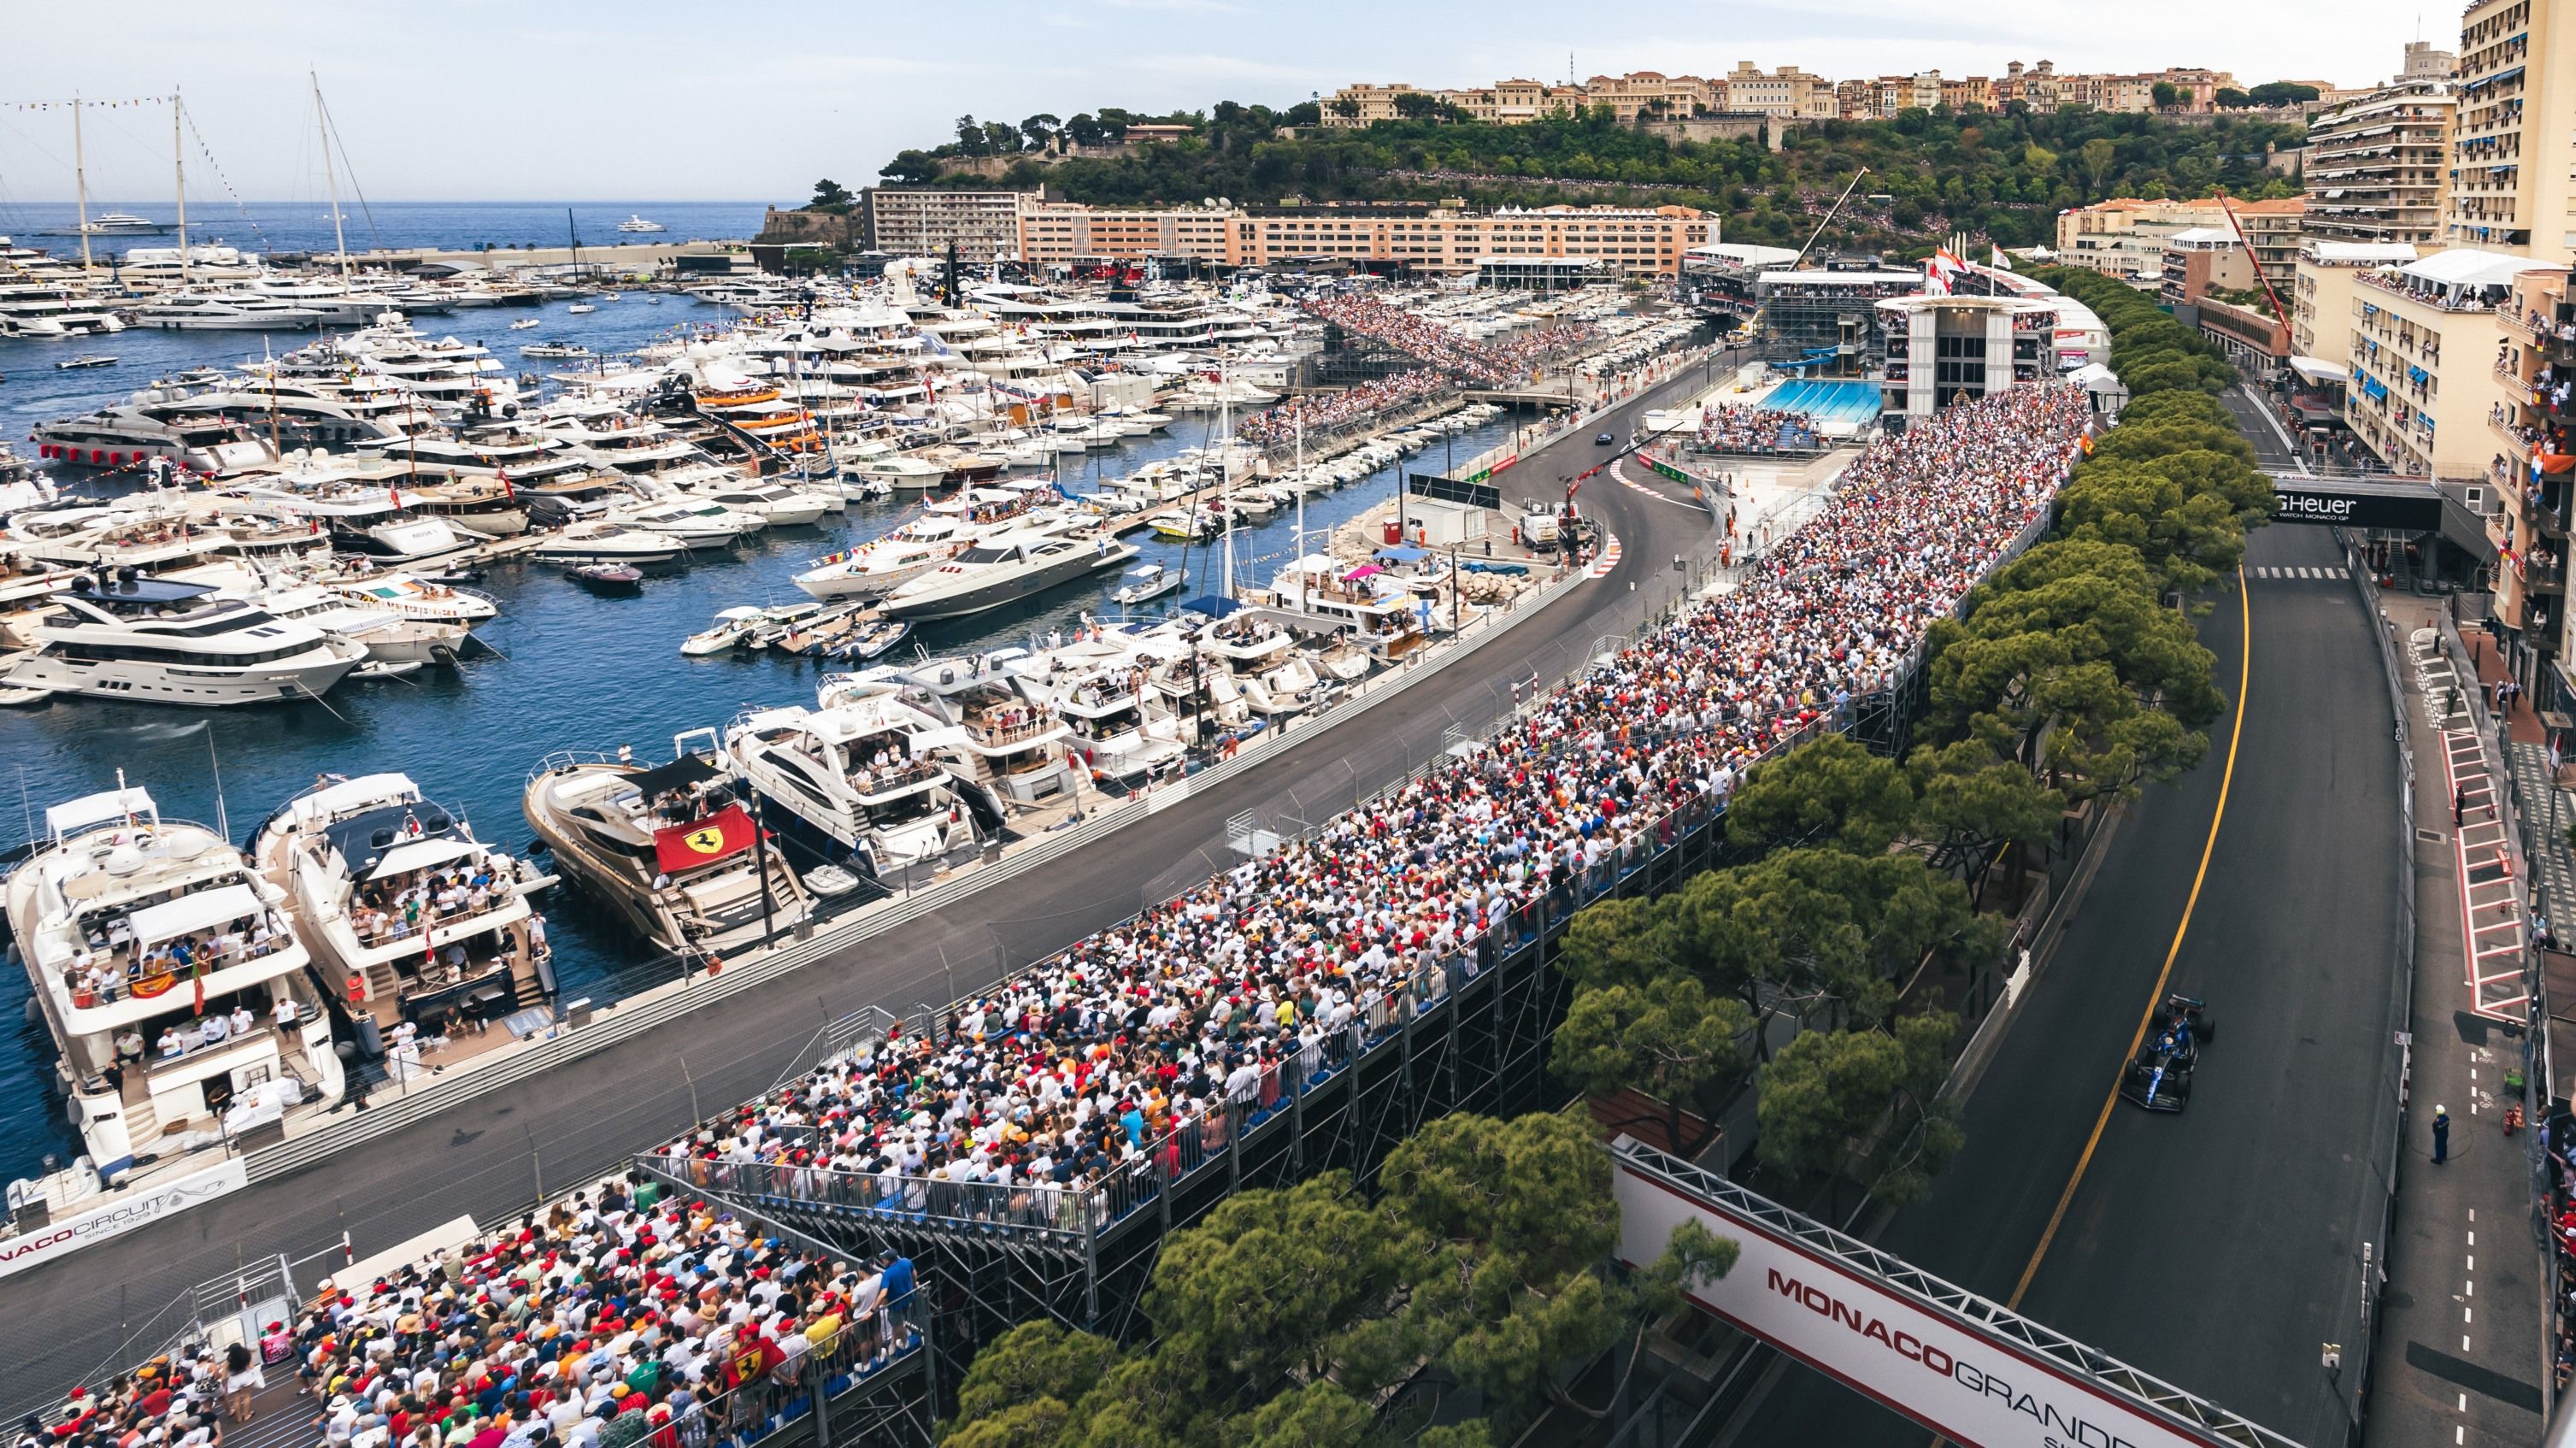 Monaco Grand Prix track with yachts and crowd.